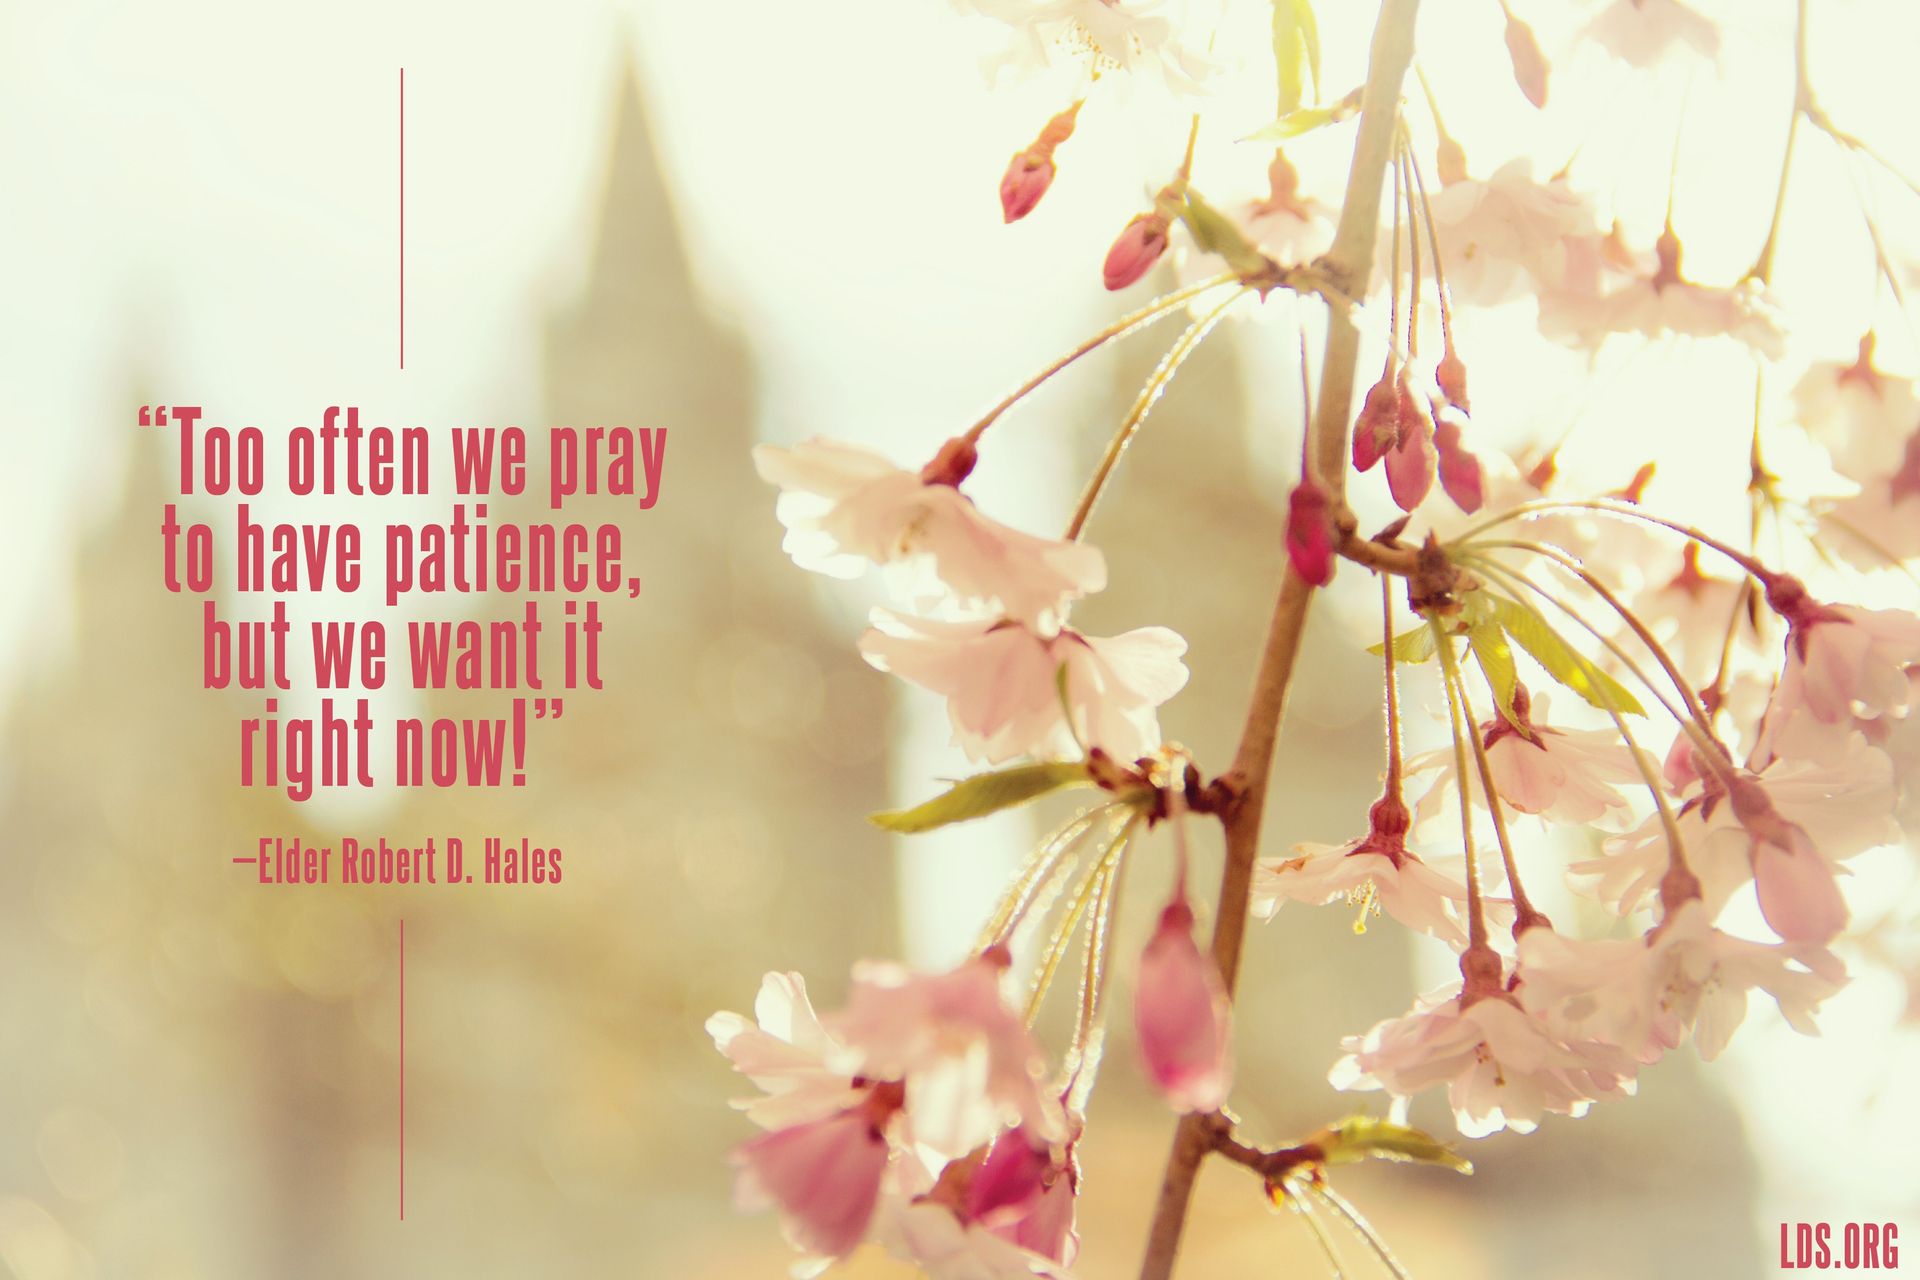 “Too often we pray to have patience, but we want it right now!”—Elder Robert D. Hales, “Waiting upon the Lord: Thy Will Be Done.” © undefined ipCode 1.